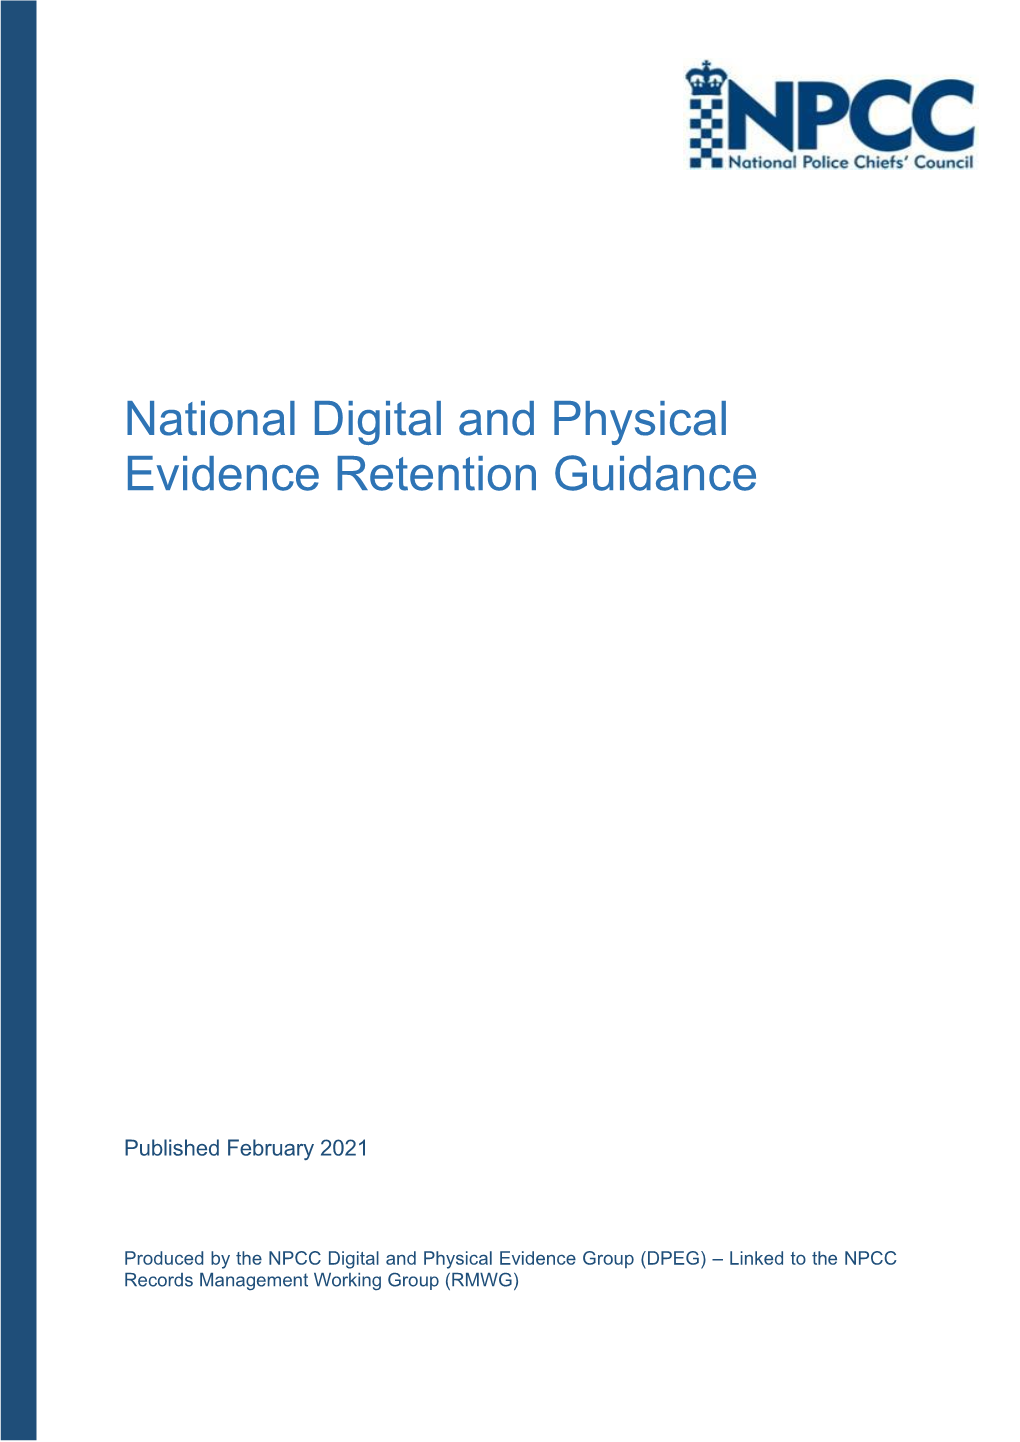 Physical and Digital Evidence Retention Model and Review